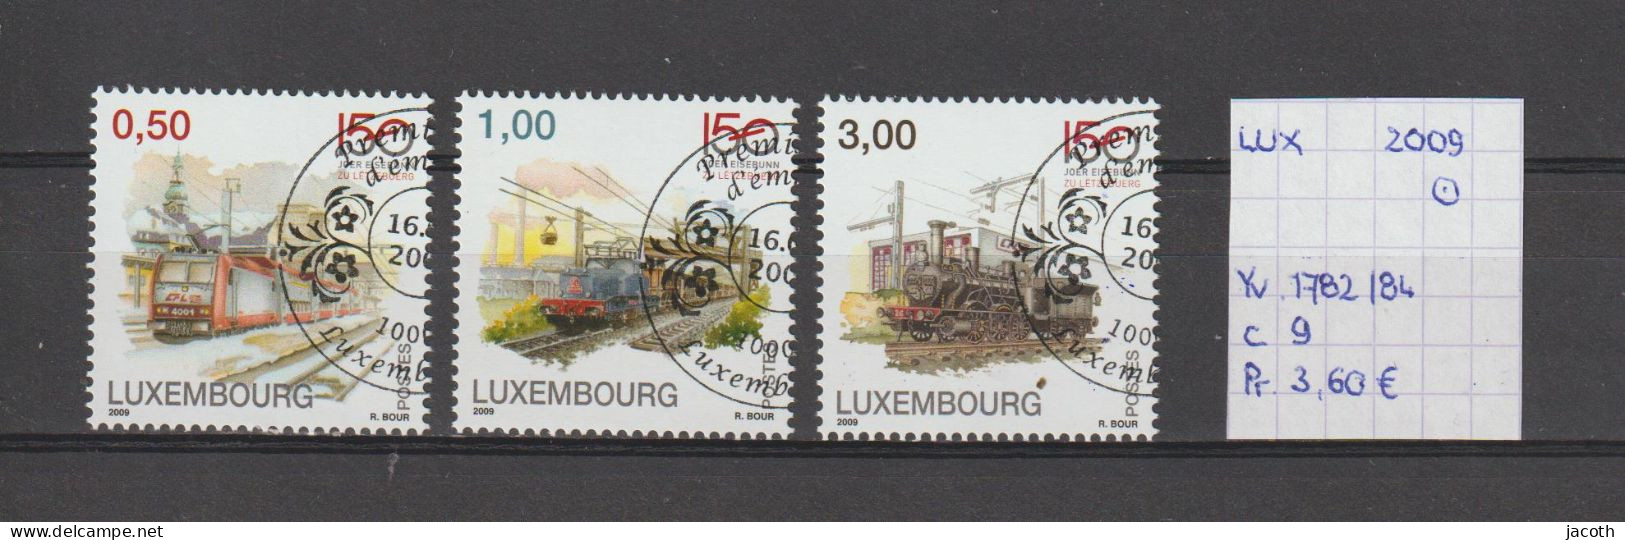 (TJ) Luxembourg 2009 - YT 1782/84 (gest./obl./used) - Usati